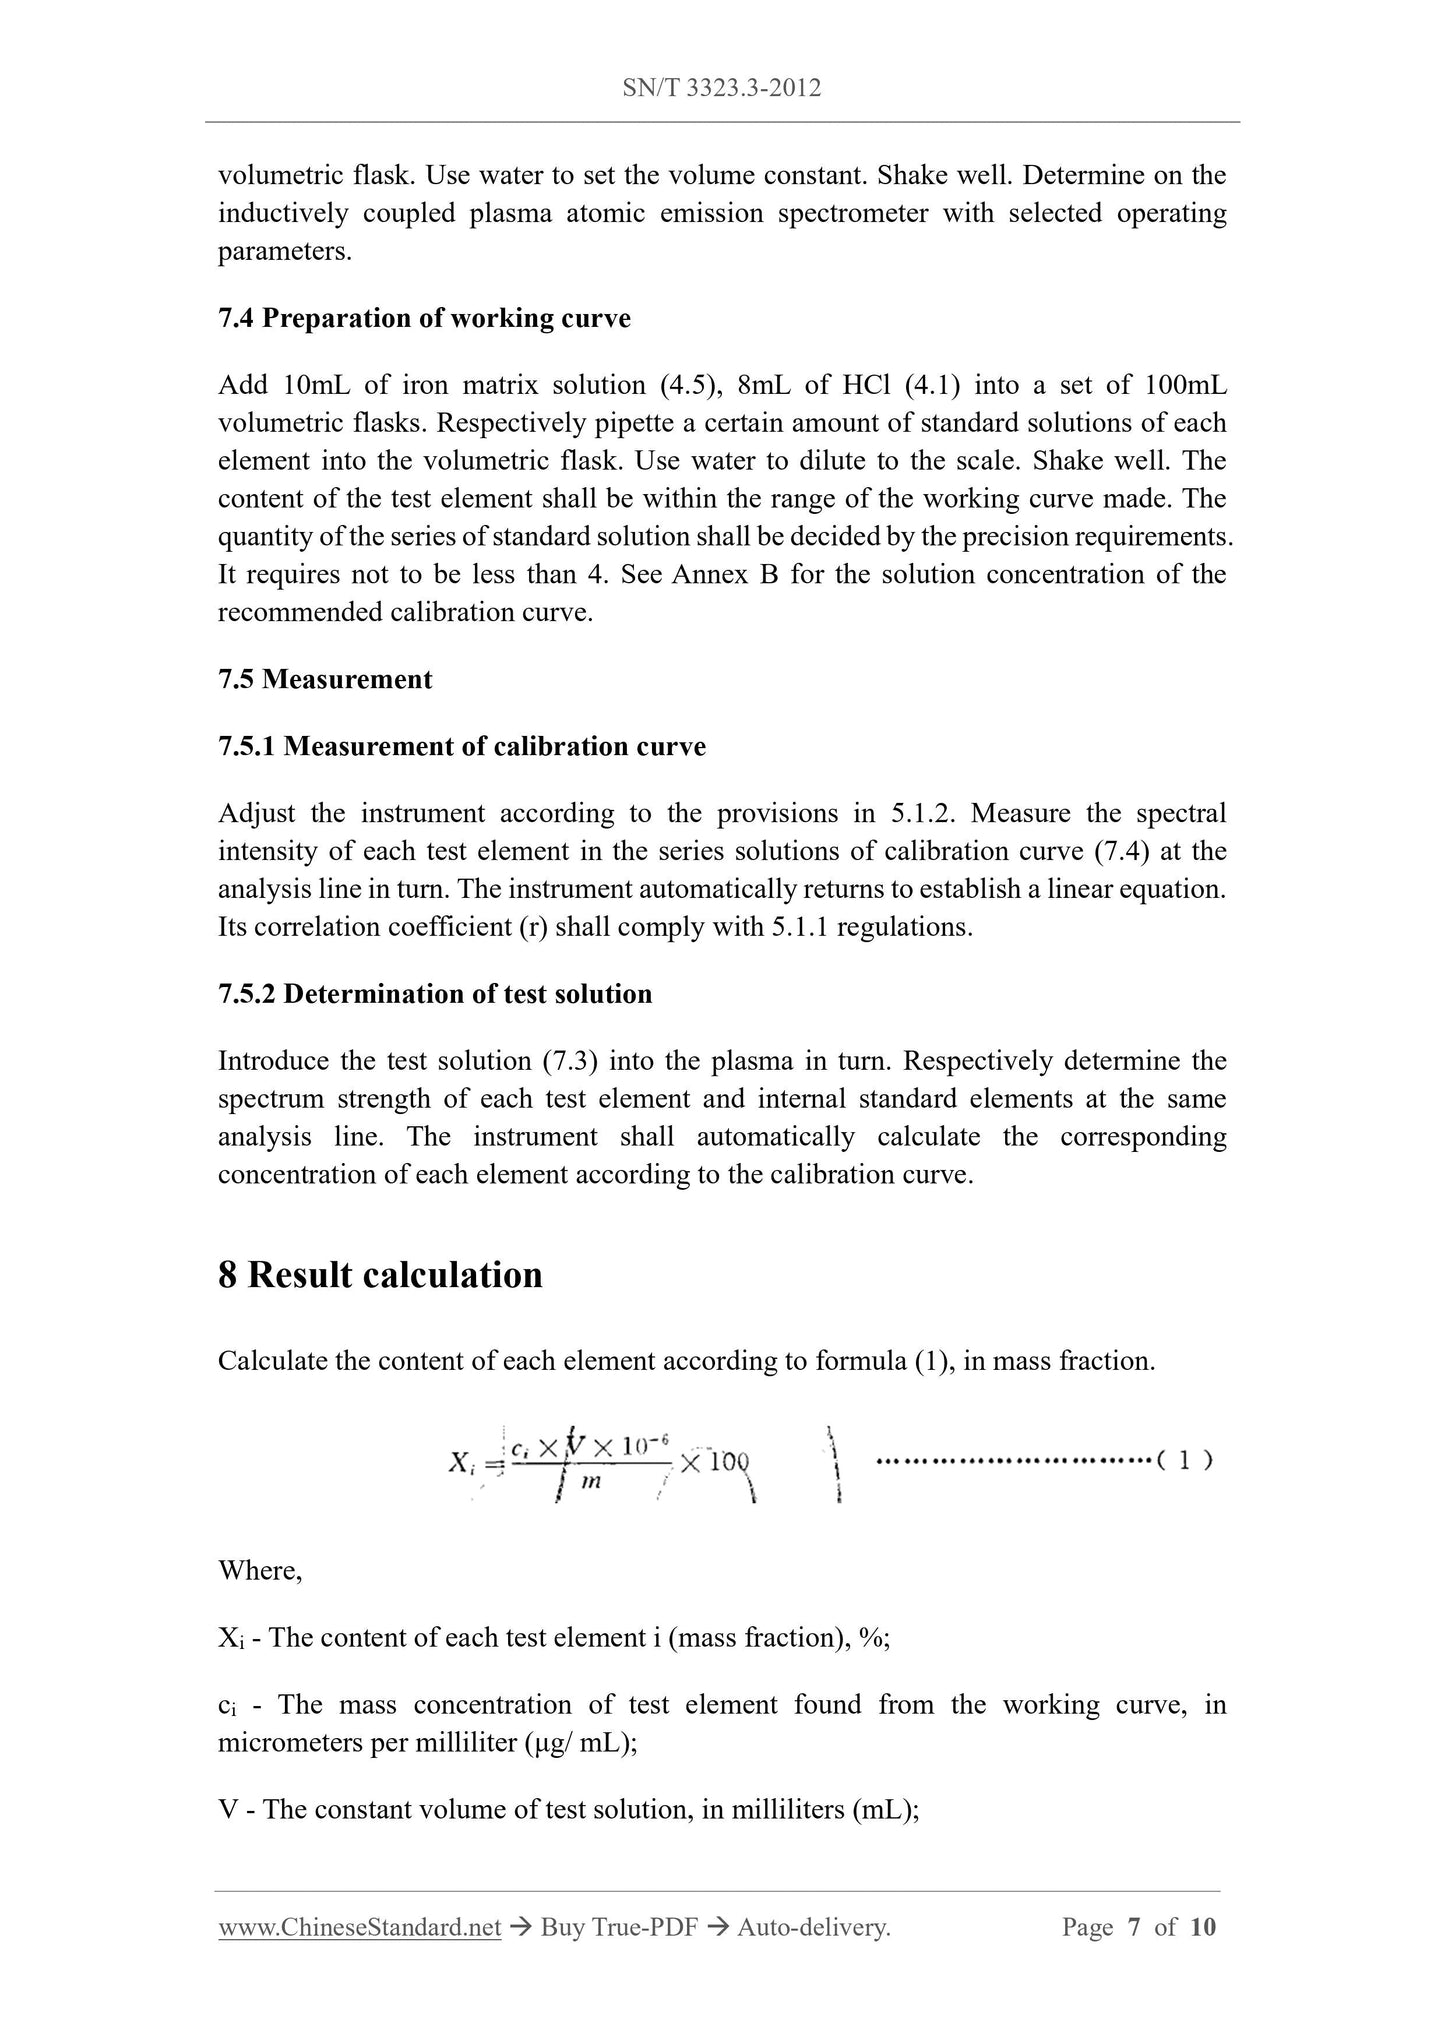 SN/T 3323.3-2012 Page 5